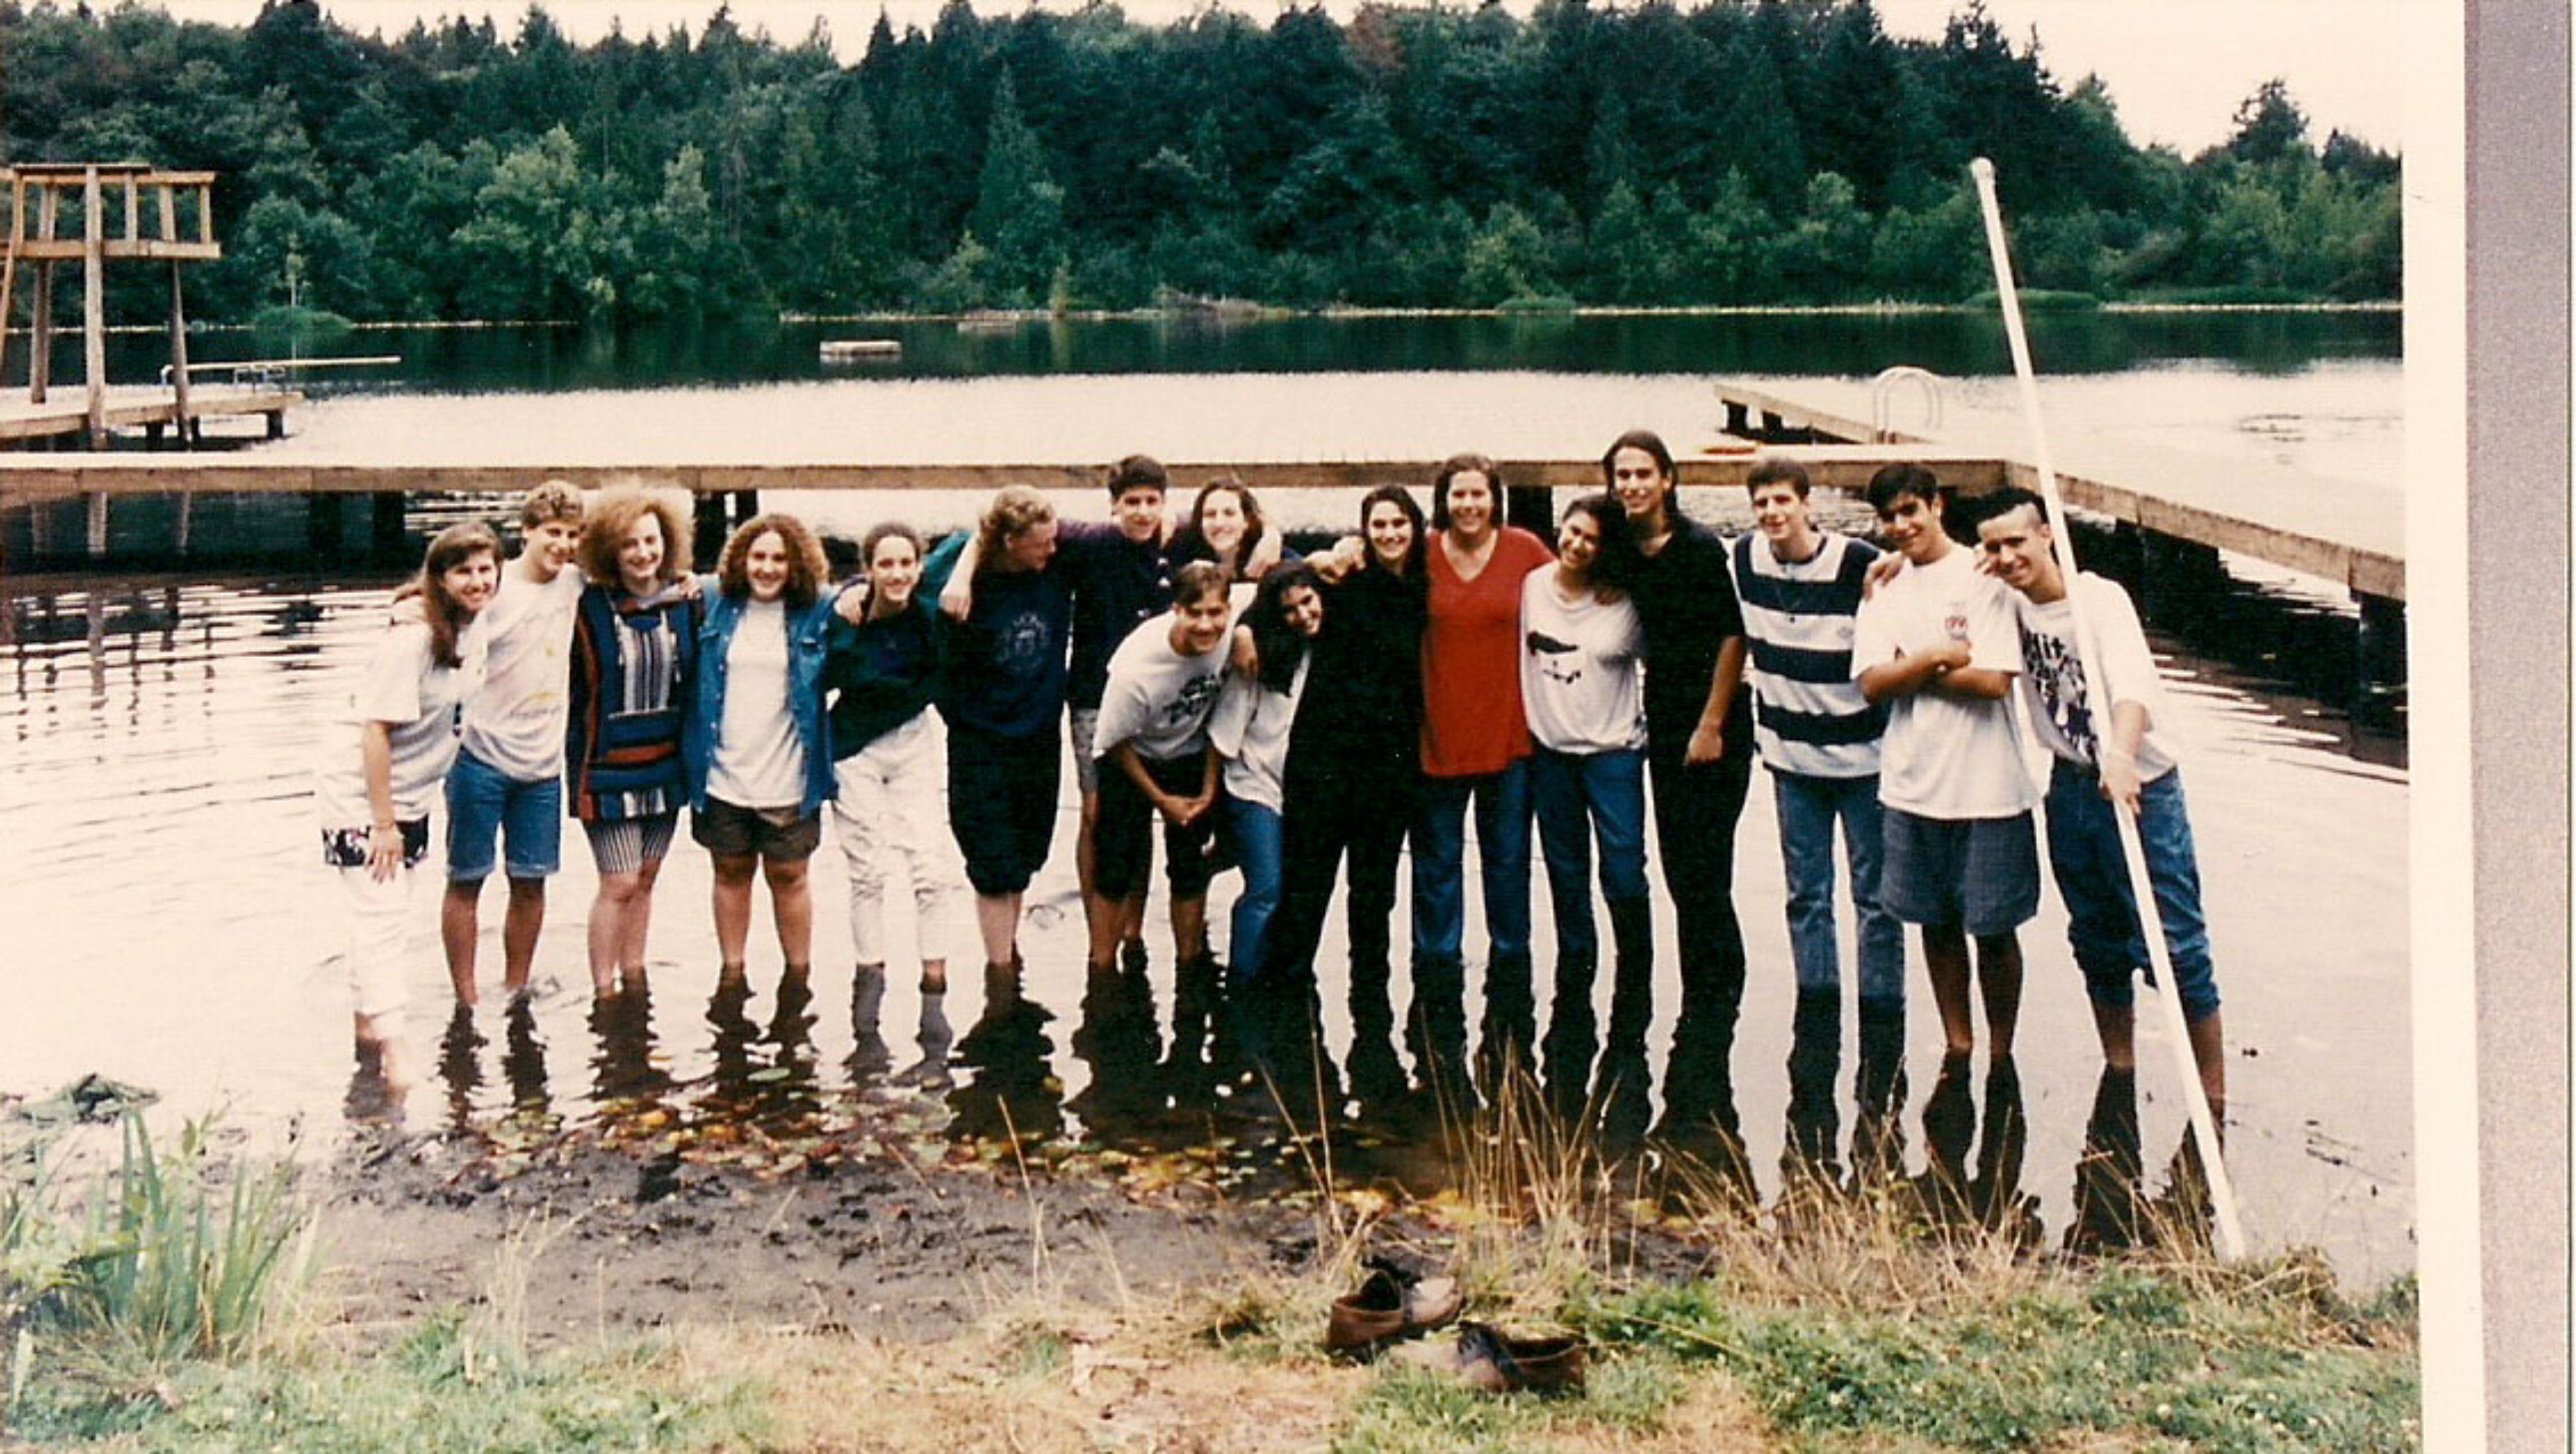 teens wading in a lake.